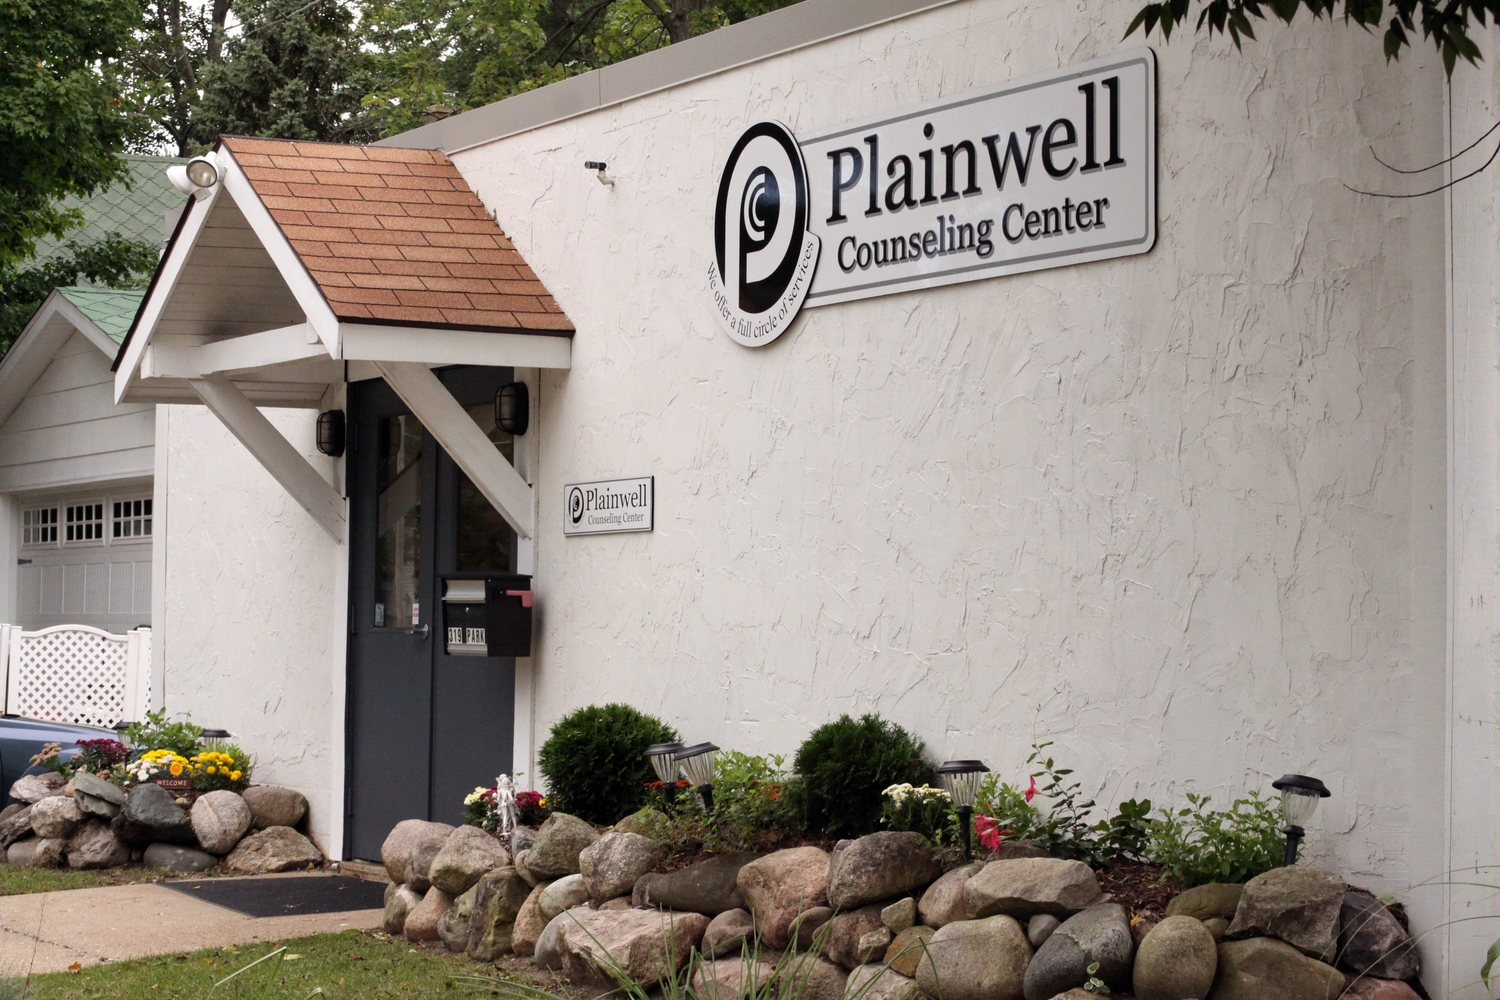 Gallery Photo of Plainwell Counseling Center - A private group practice